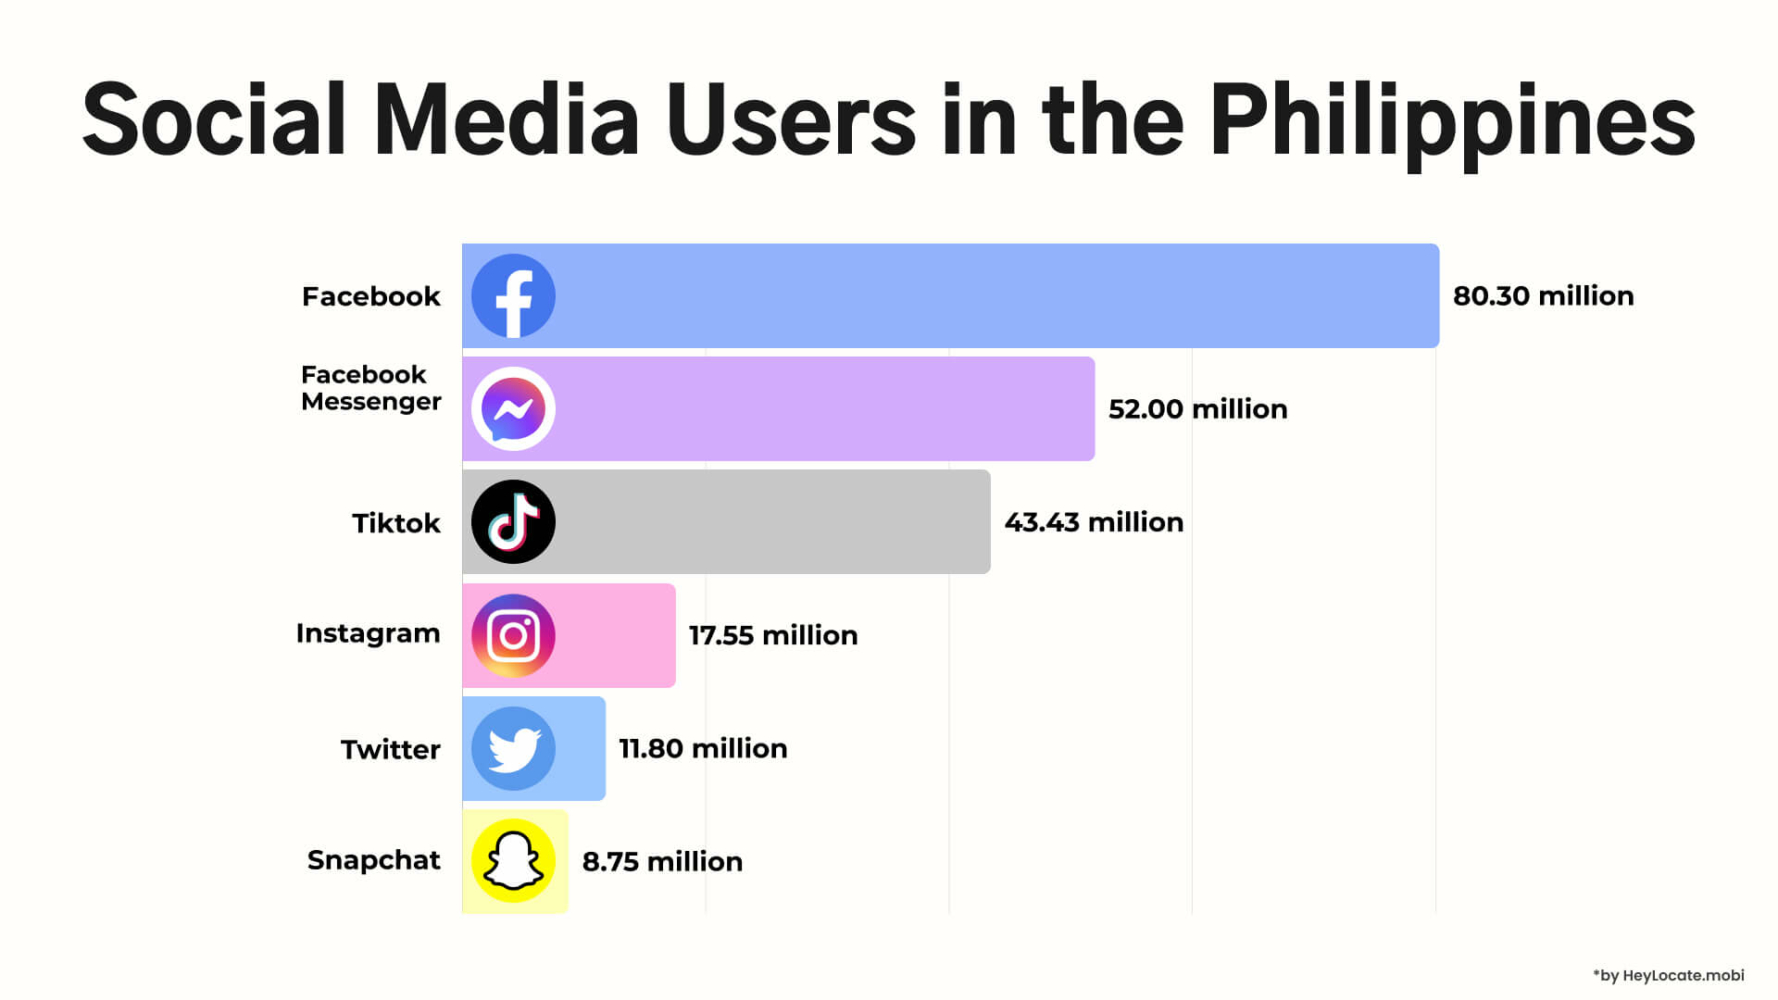 This is an infographic by HeyLocate.mobi titled "Social Media Users in the Philippines." It presents a horizontal bar graph with different social media platforms and their Filipino users' quantity